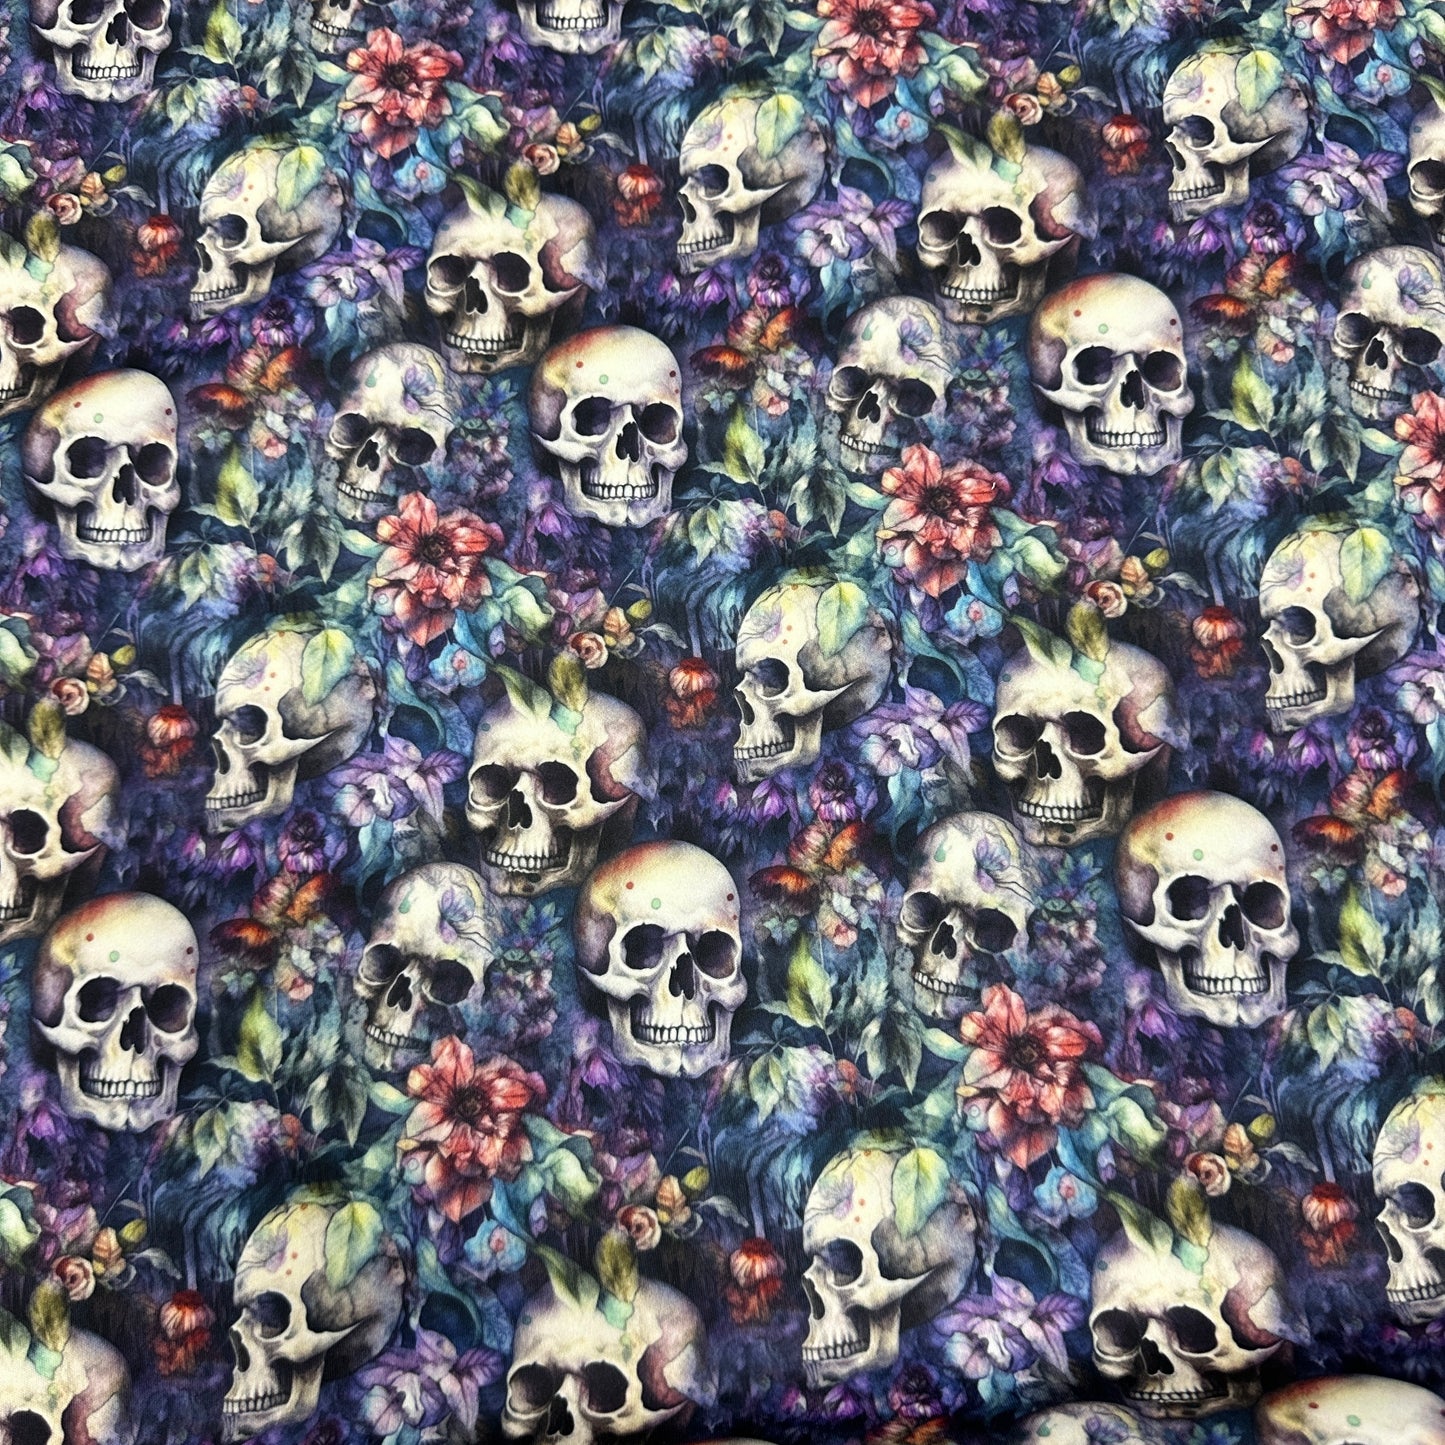 Skull Garden 1 mil PUL Fabric - Made in the USA